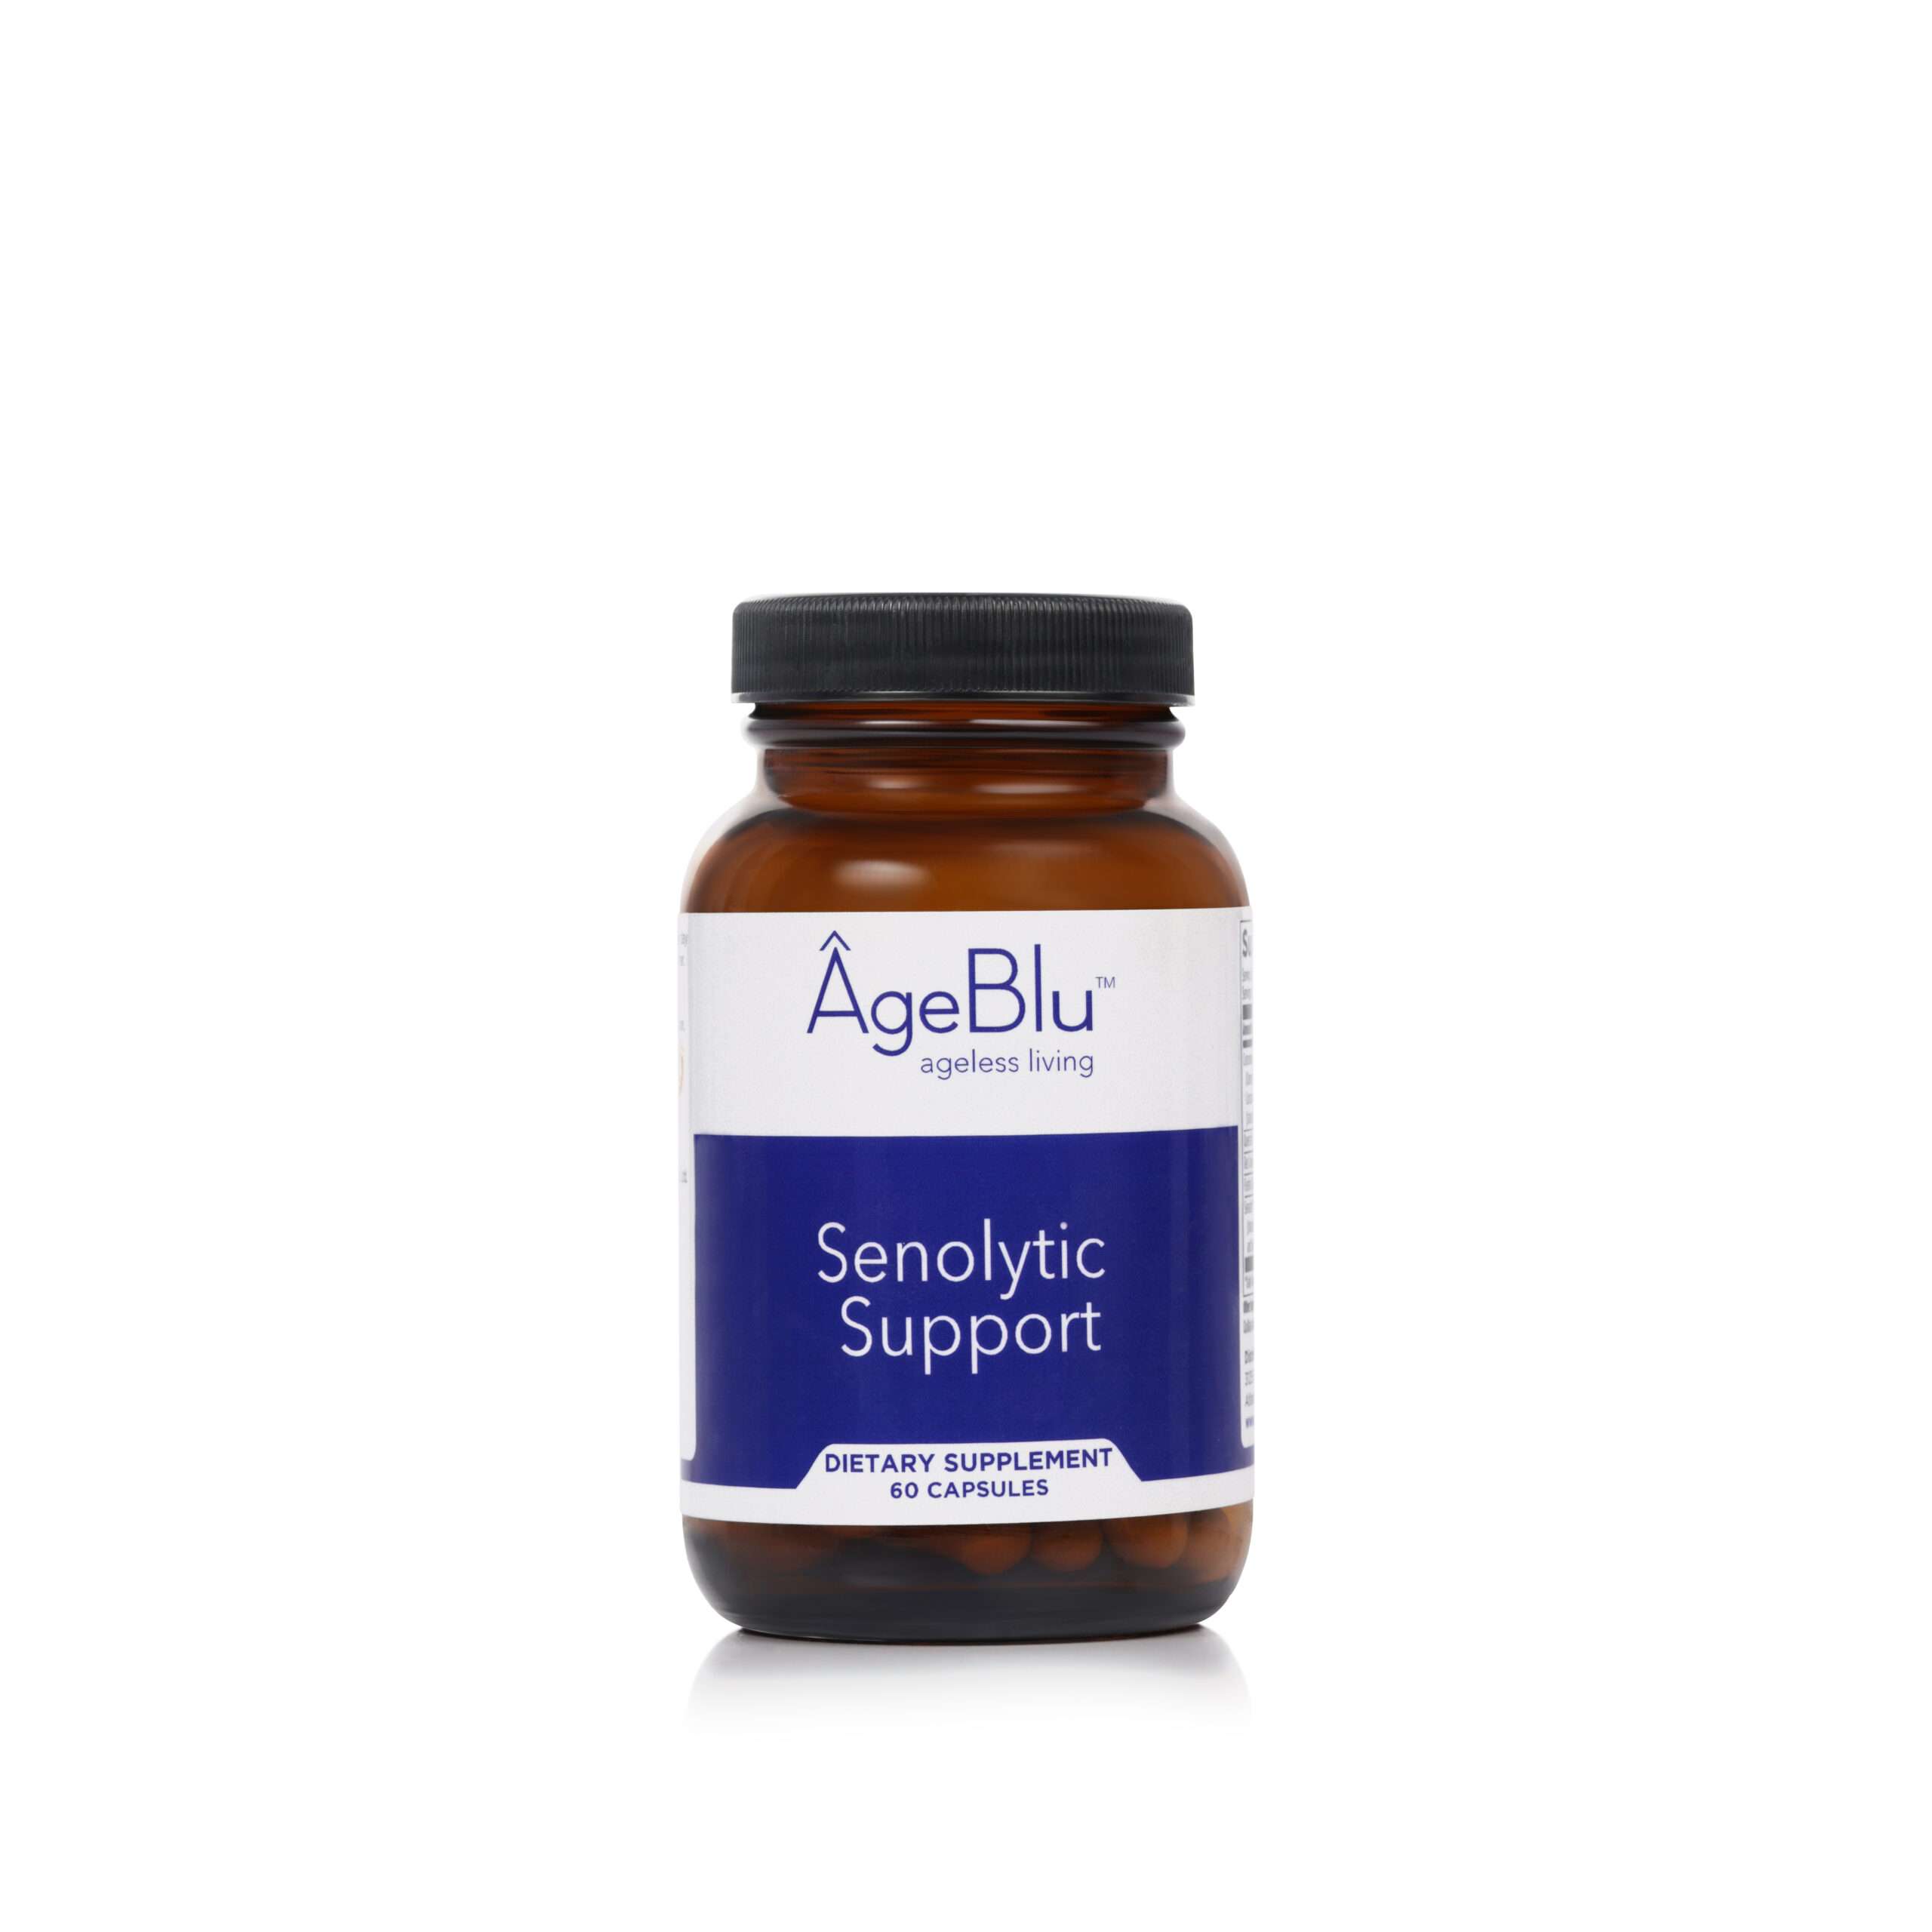 A product shot of a 60 capsule bottle of Ageblu Senolytic Support